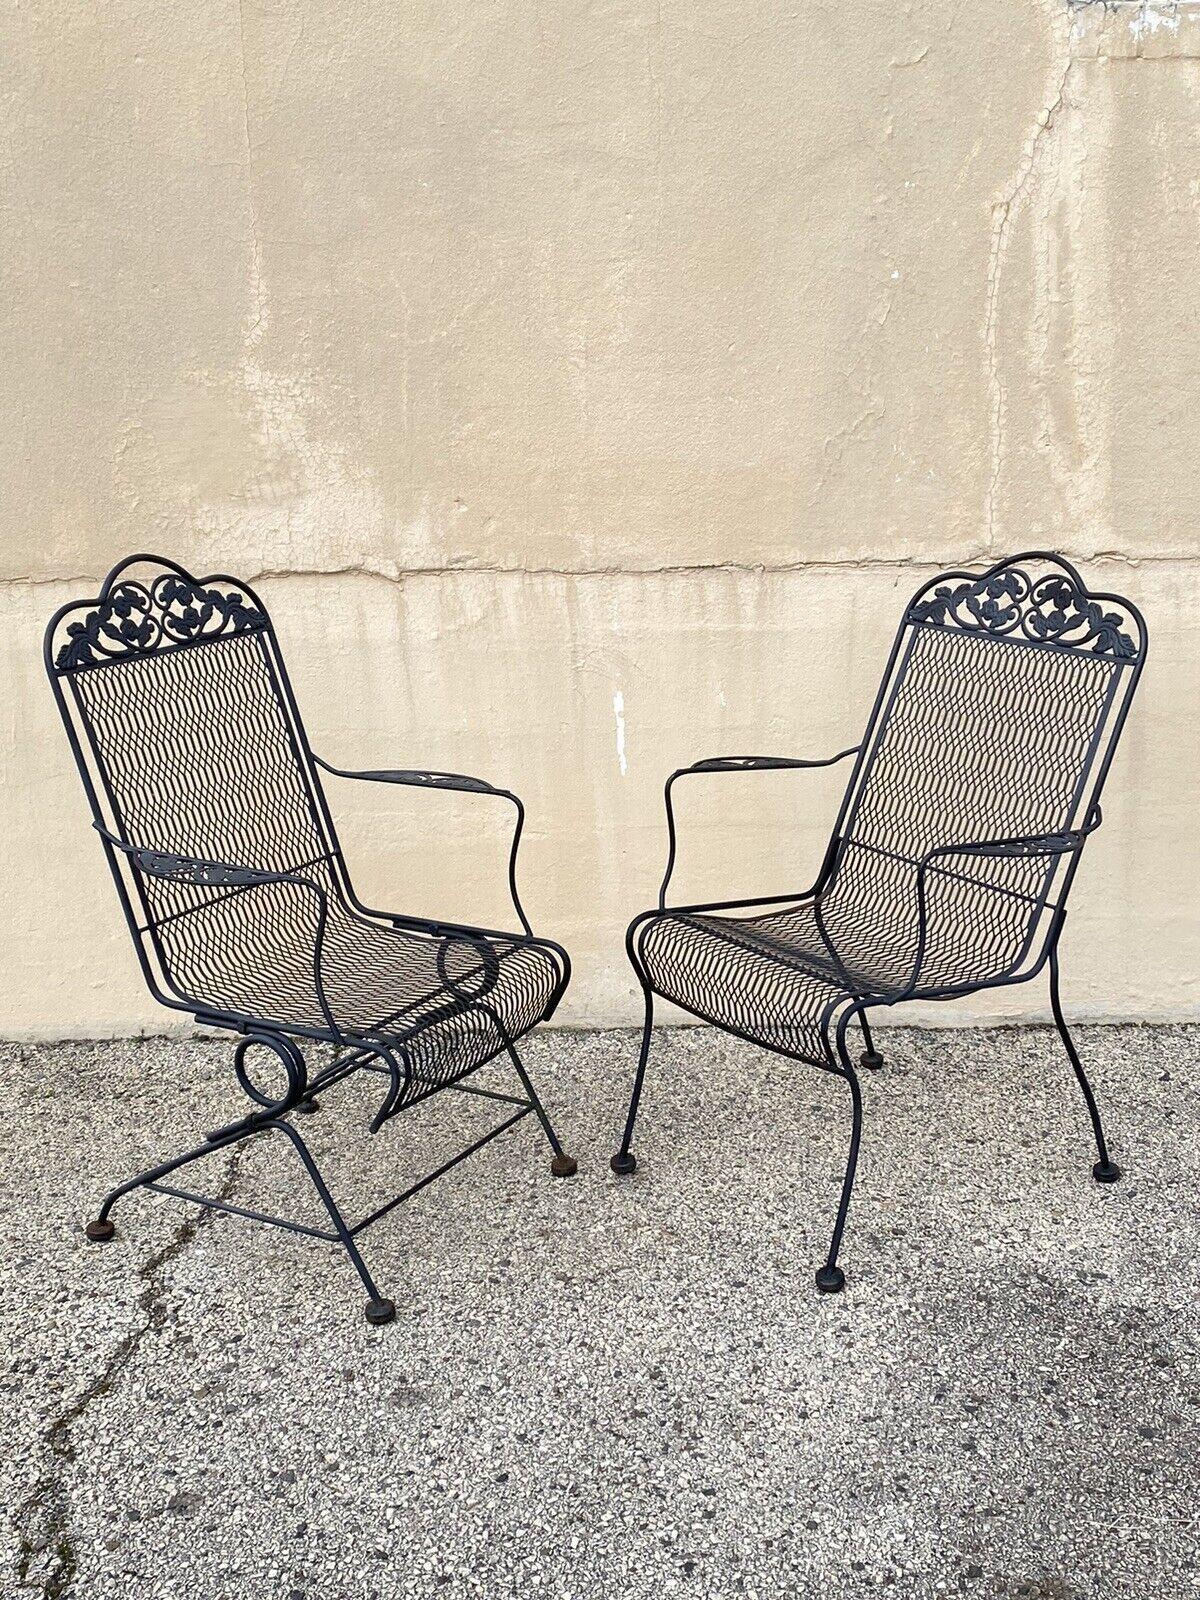 Vintage Wrought Iron Rose and Vine Pattern Garden Patio Chairs - 7 Pc Set. Item features 2 straight arm chairs, 4 spring / bouncer arm chairs, one bouncer chaise lounge chair. Circa Late 20th to 21st Century, Pre-owned.
Measurements: 
(2) Straight